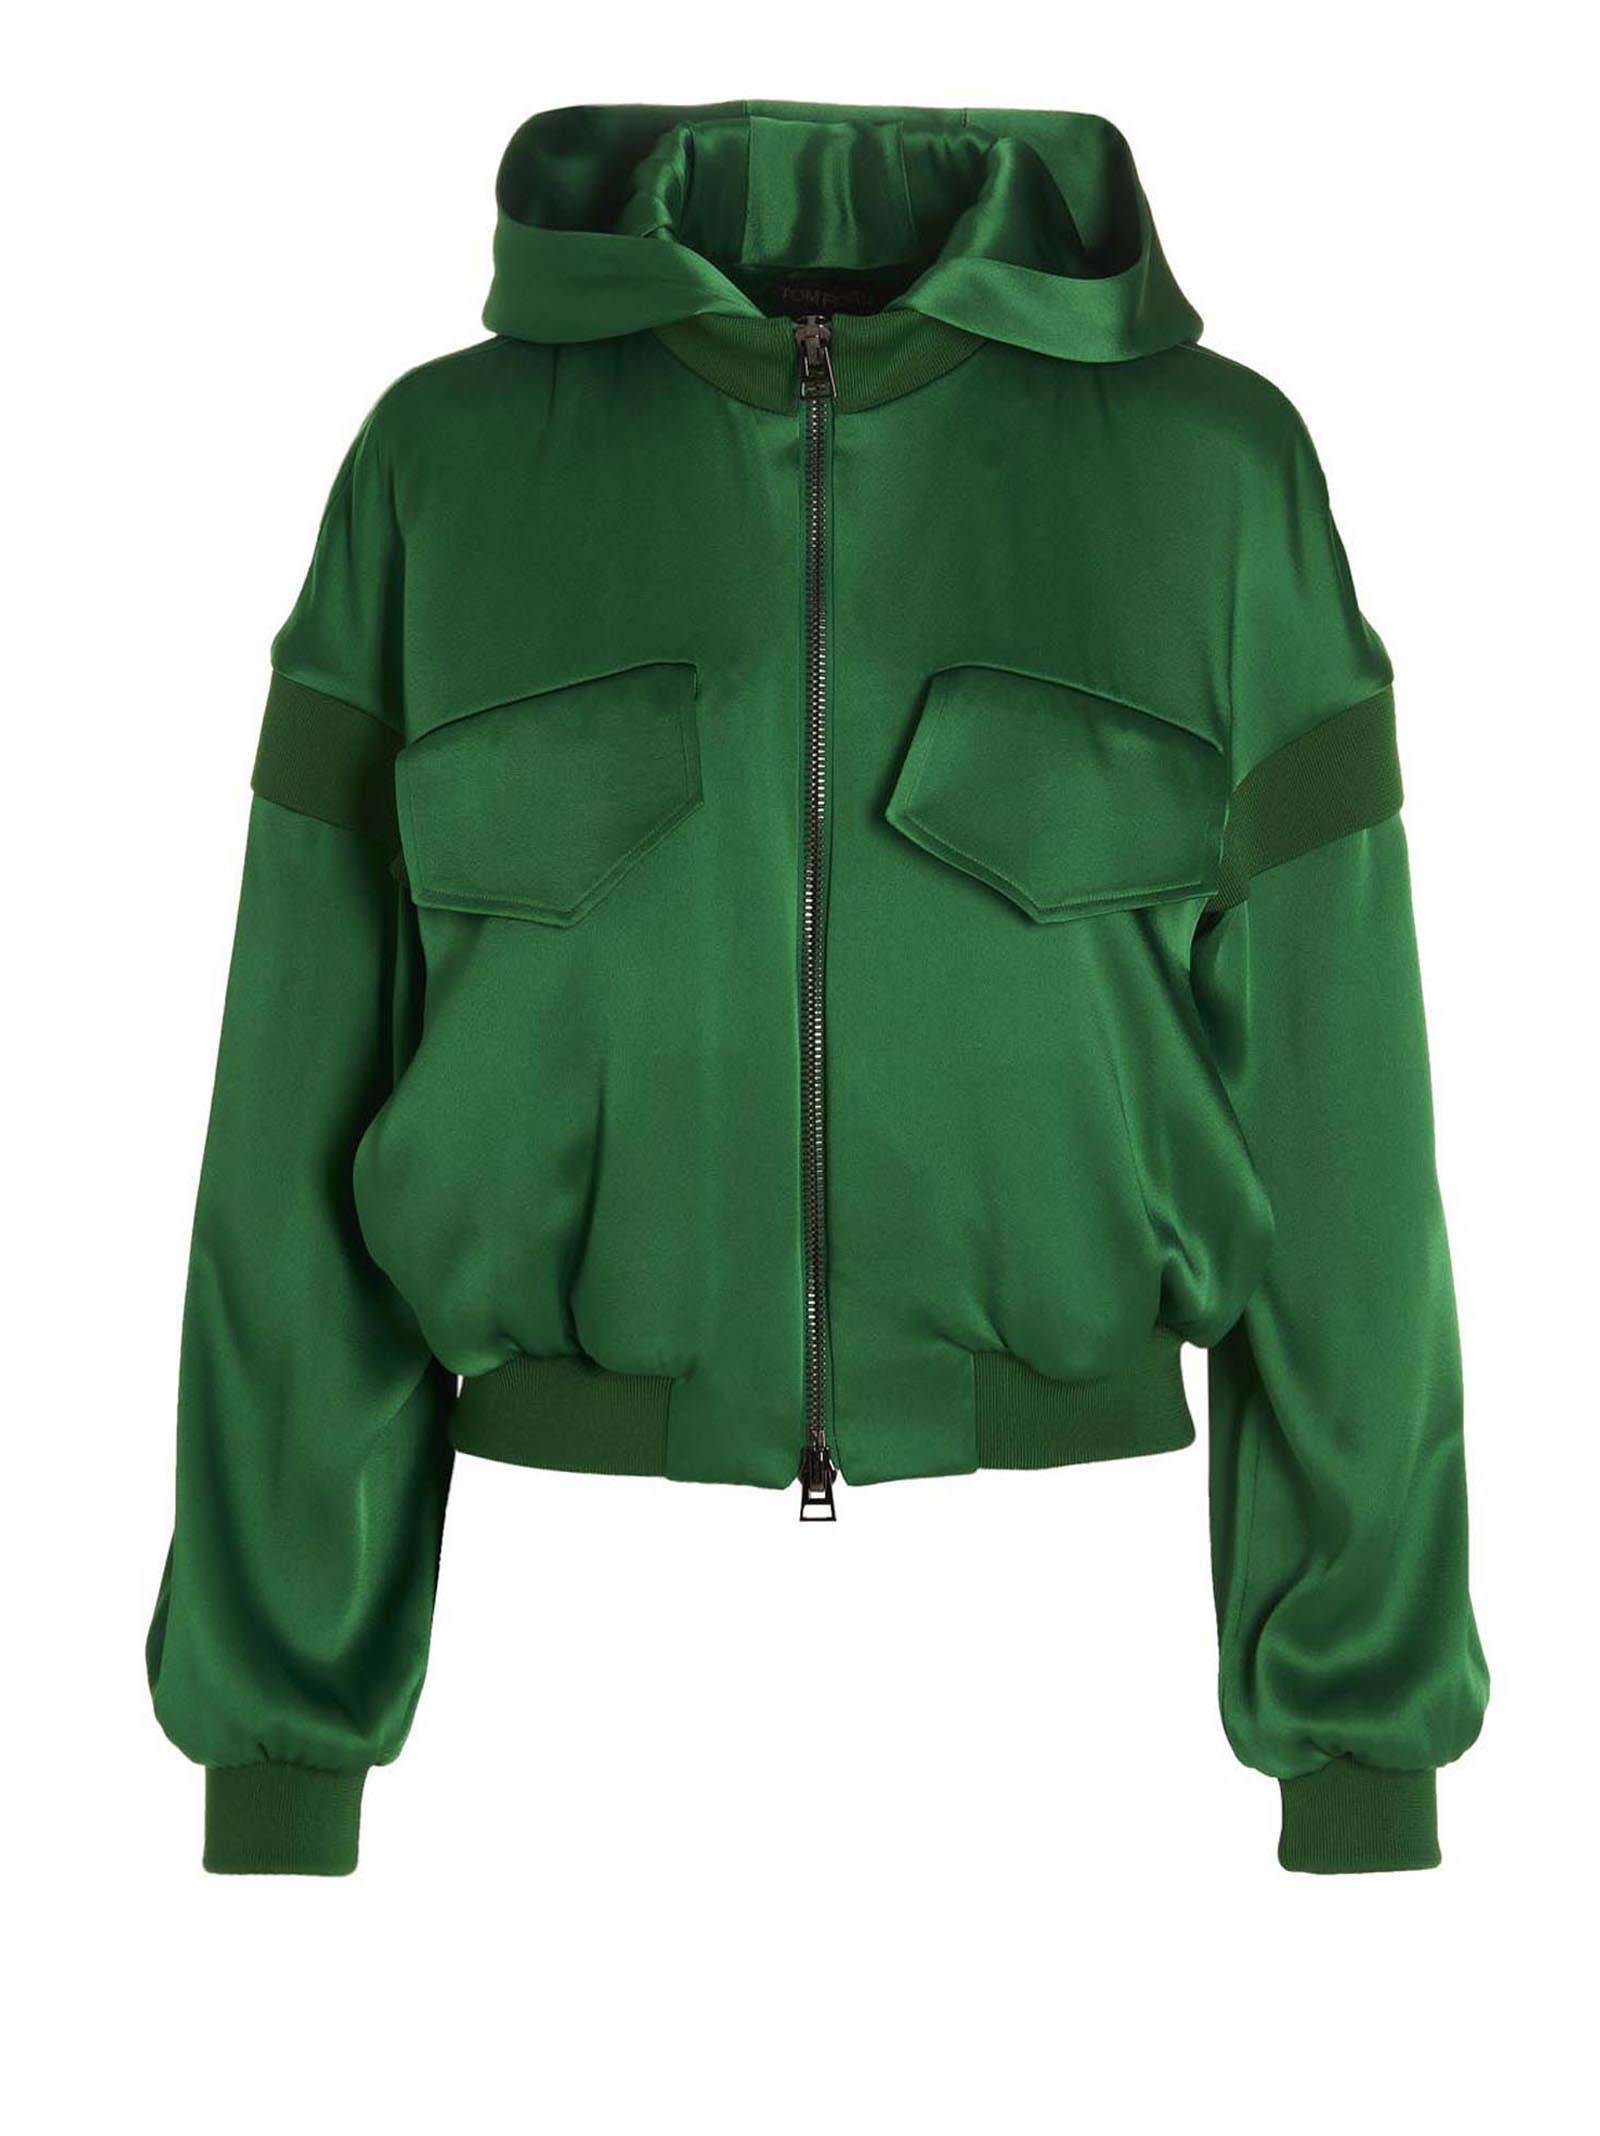 Tom Ford Satin Hooded Jacket In Green